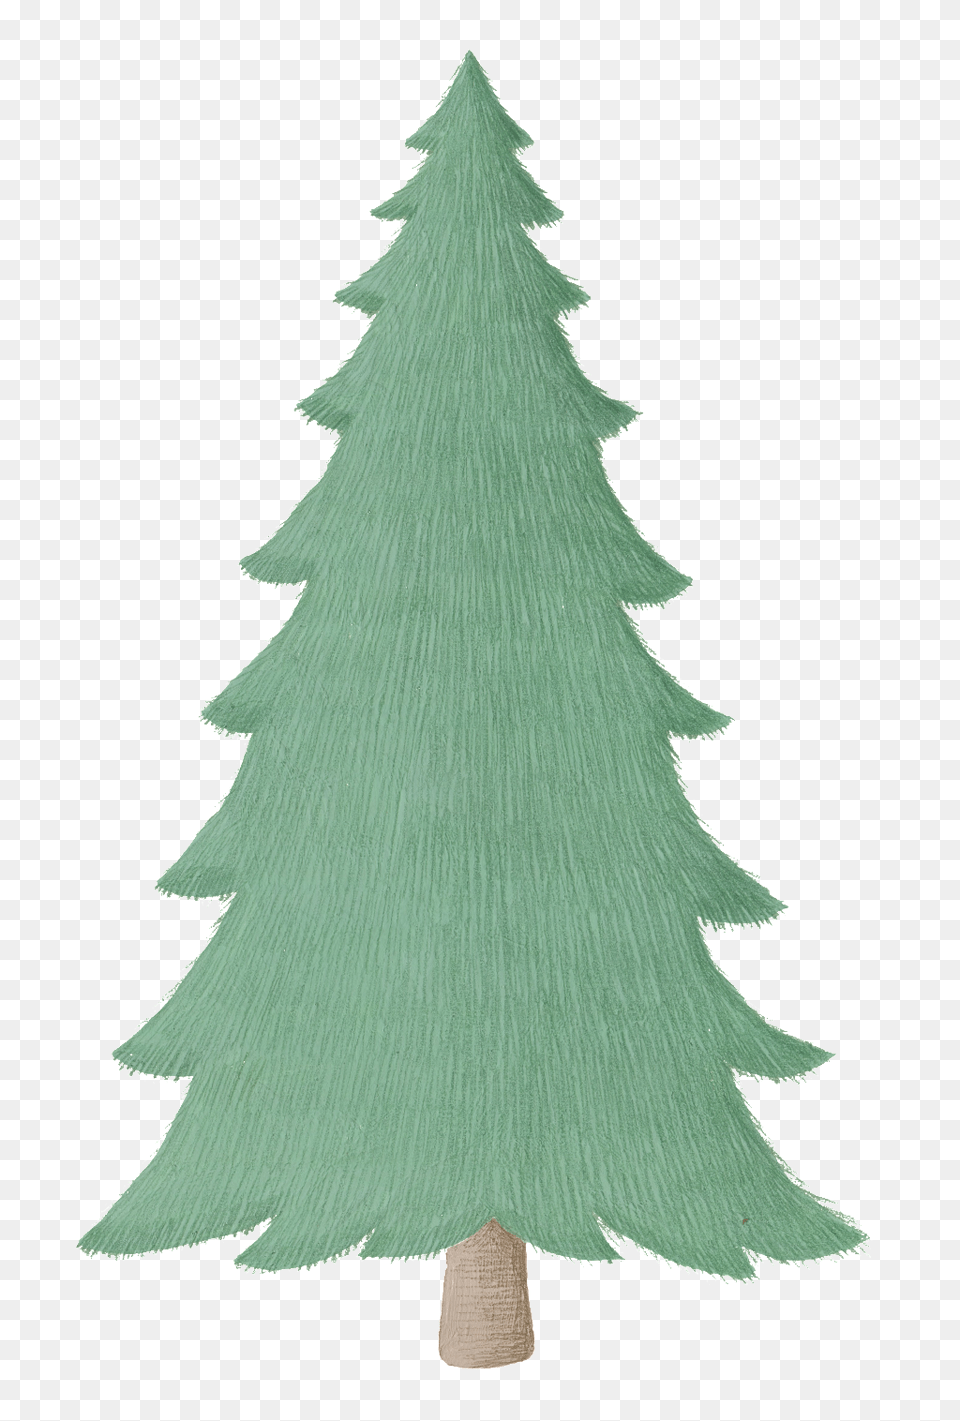 Cartoon Pine Tree Images Download Vector, Plant, Festival, Christmas, Christmas Decorations Png Image